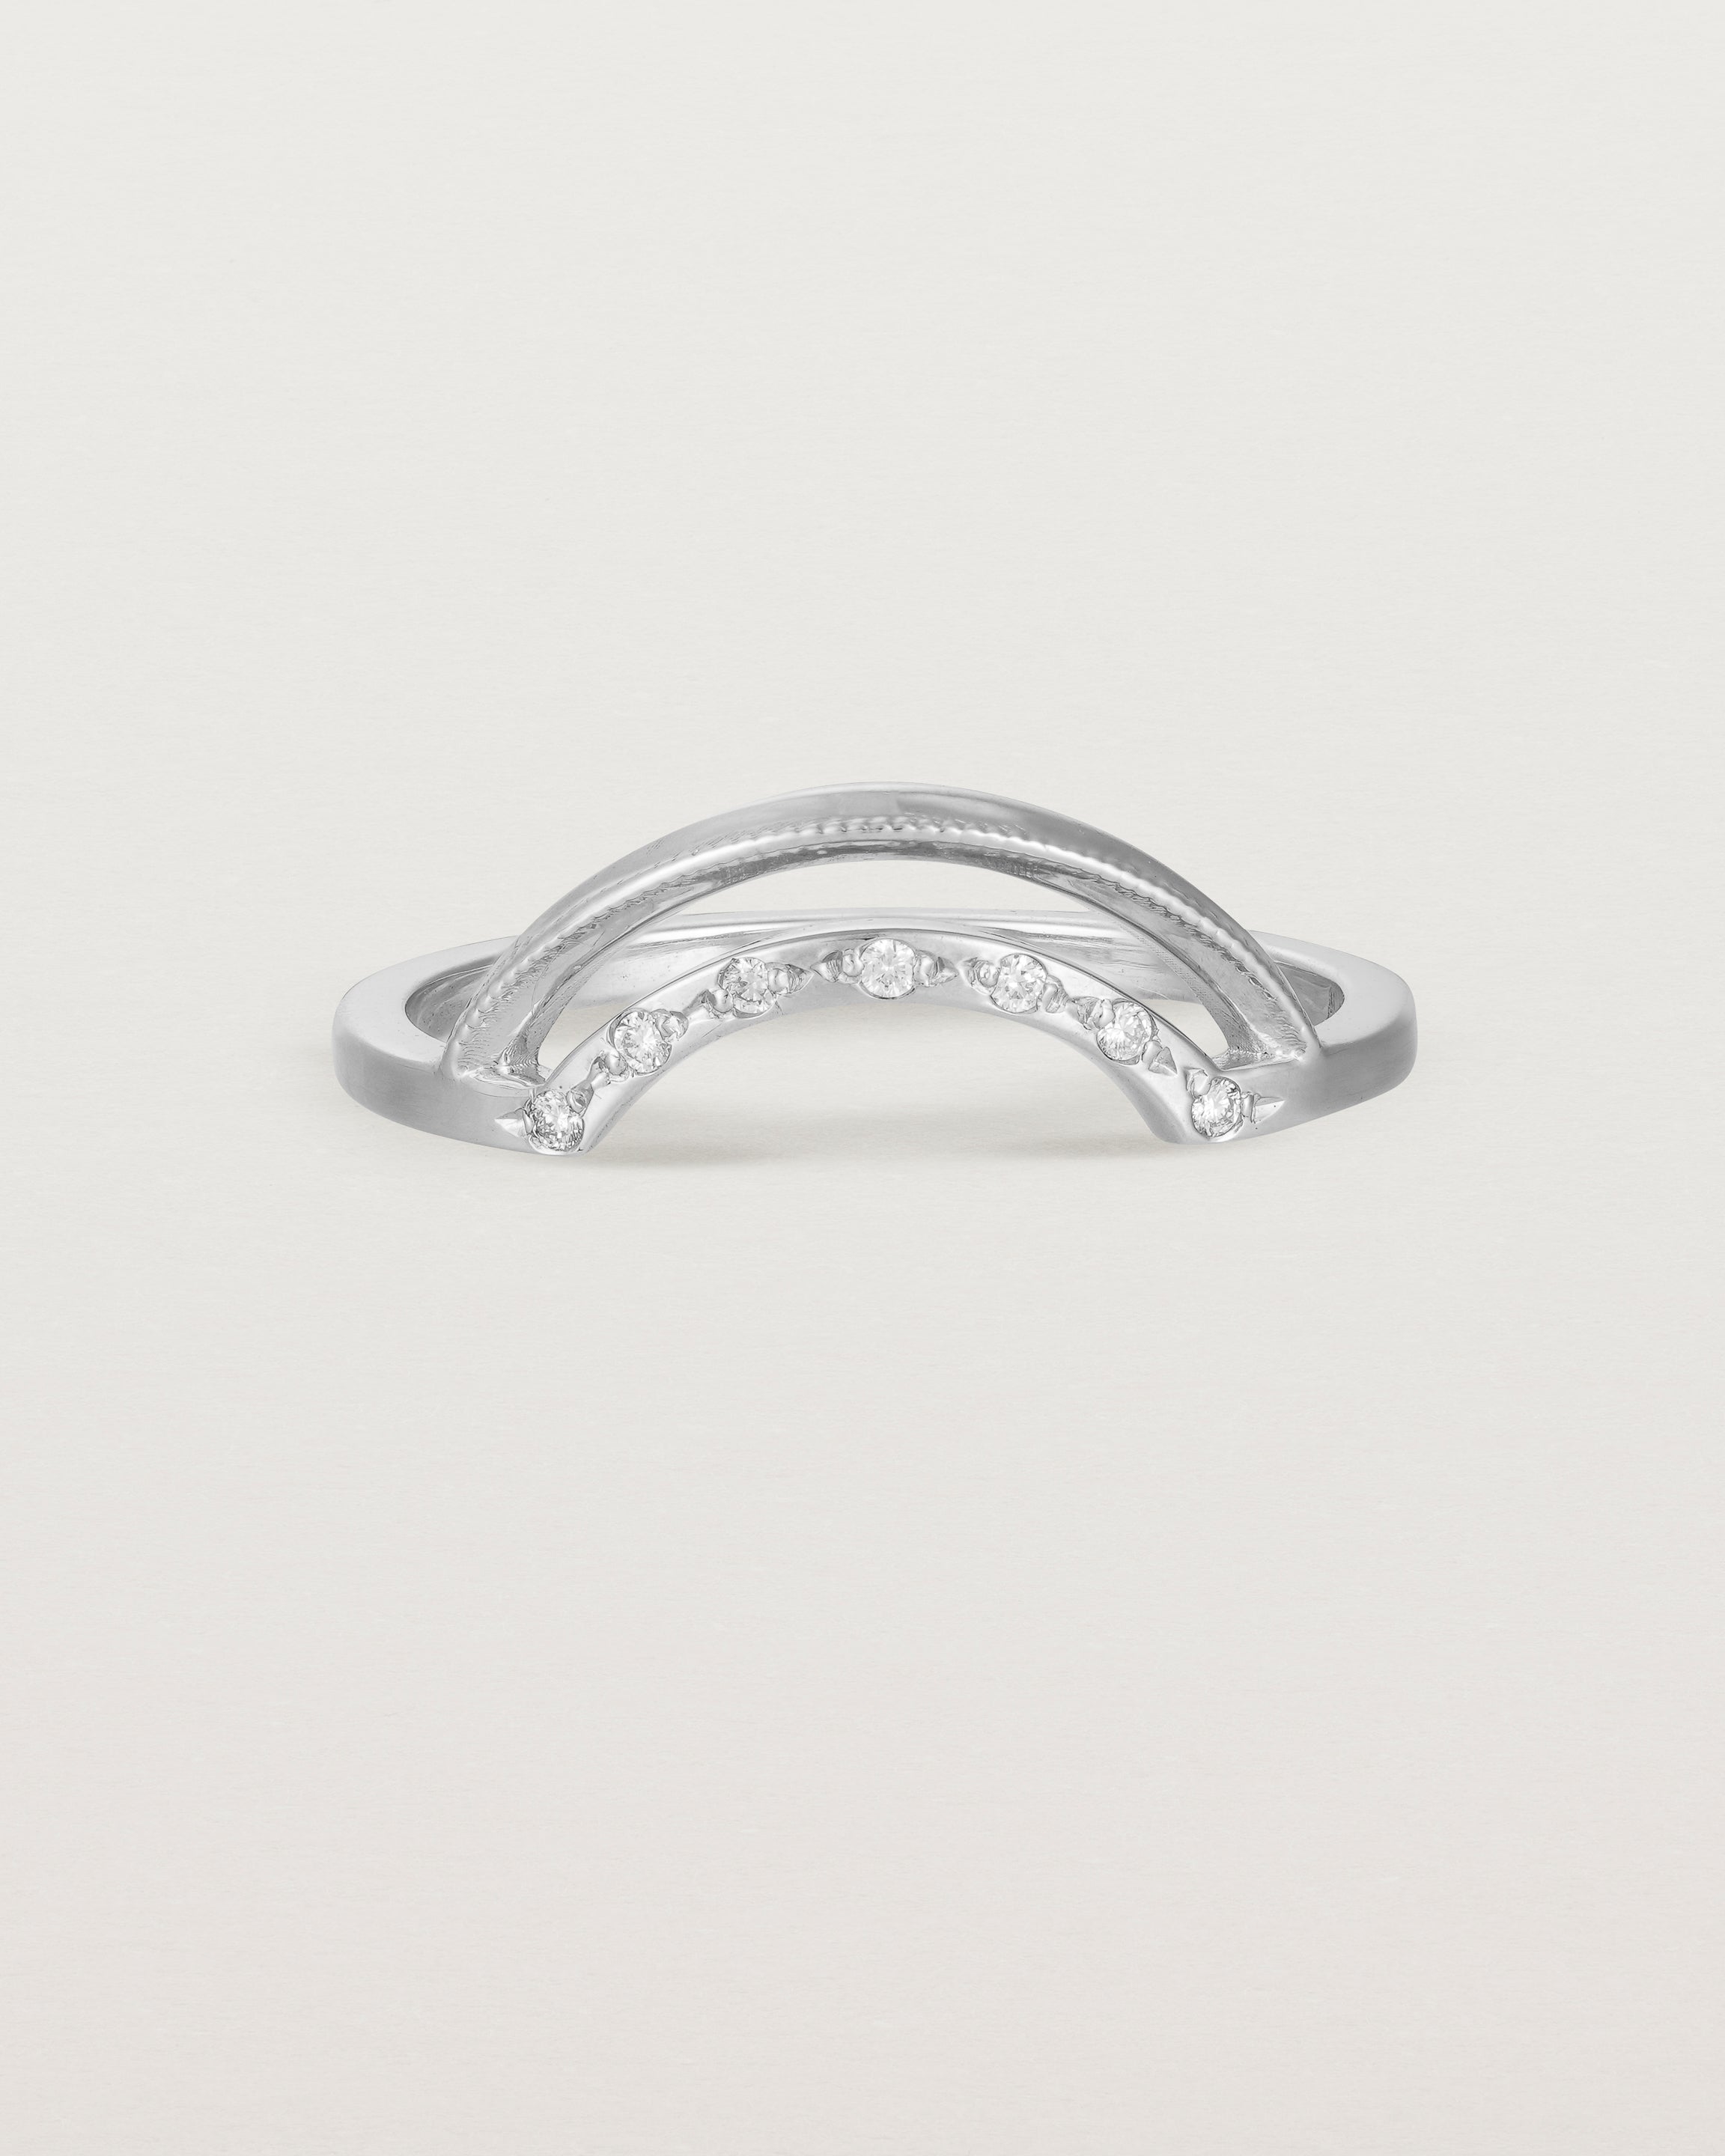 Fit three of a double arc crown ring with white diamonds adoring the inner arc - crafted in white gold.